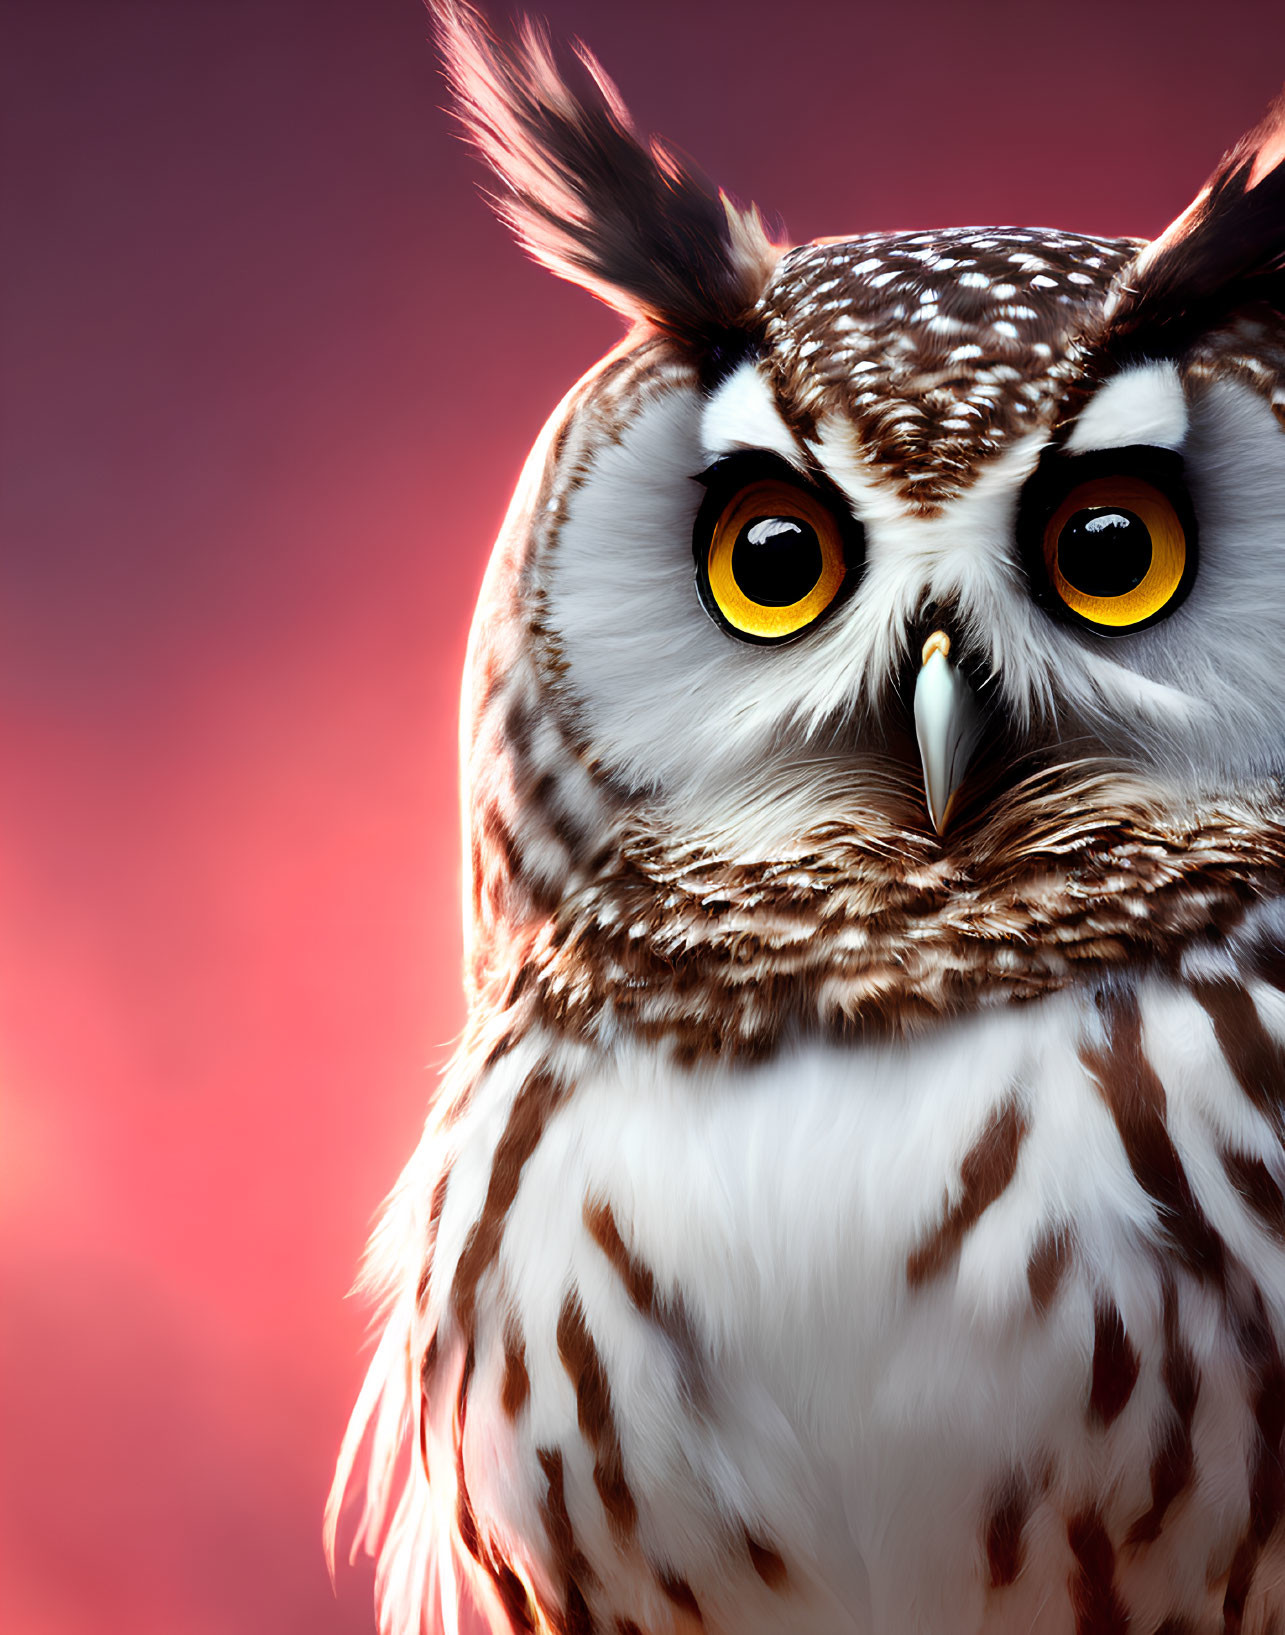 Majestic owl with yellow eyes and detailed feathers on pinkish-red background